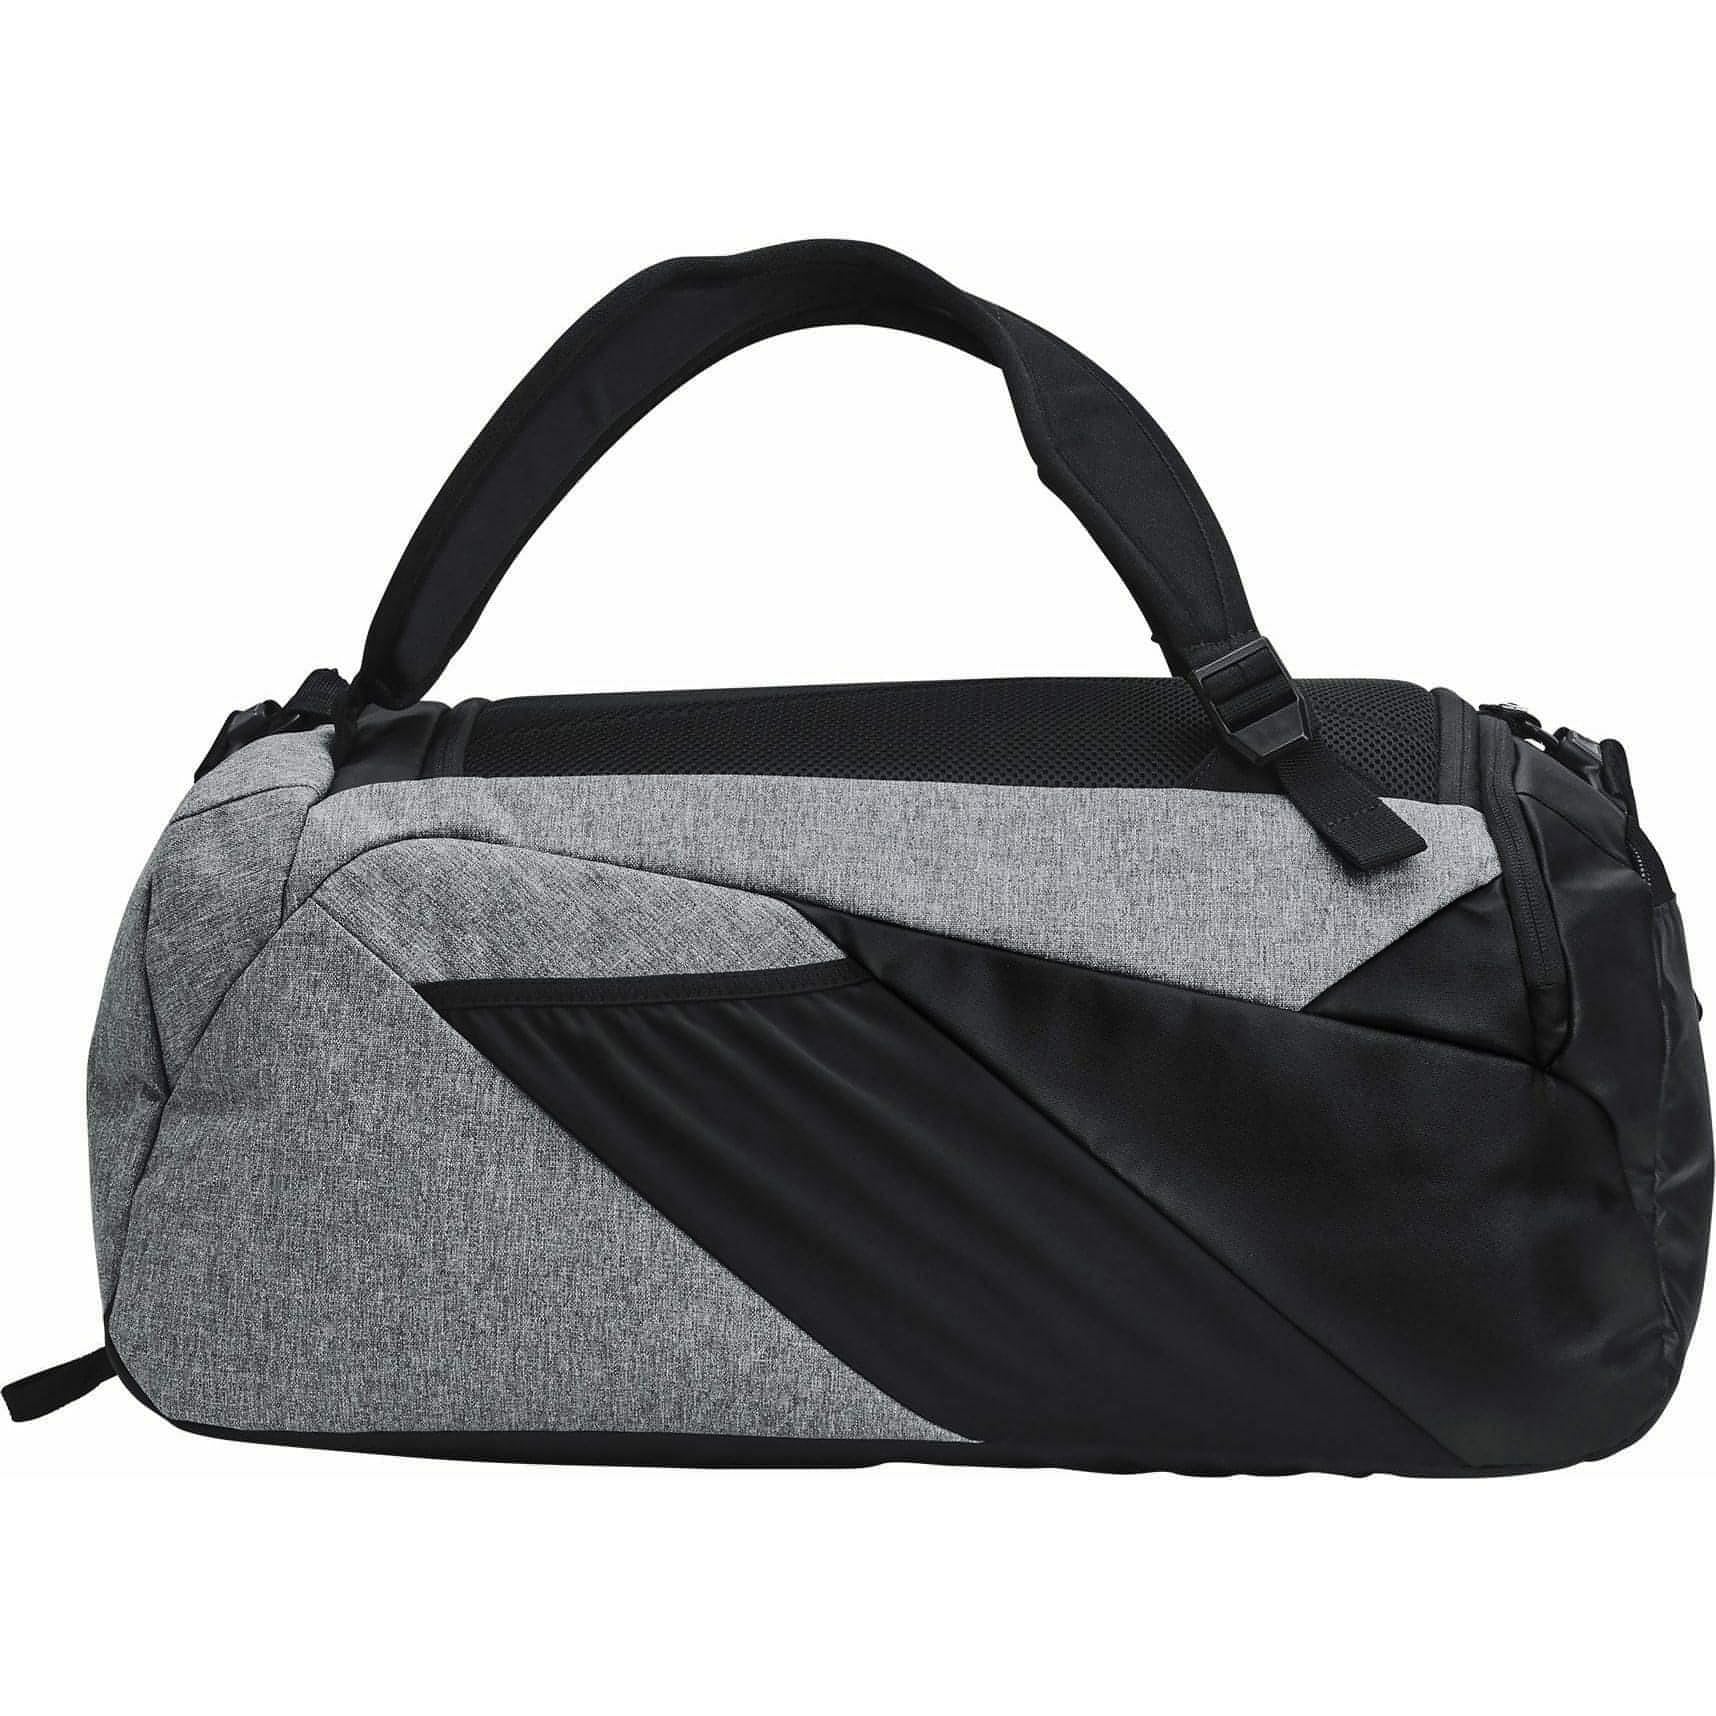 Under Armour Contain Duo Small Holdall - Grey 194514063429 - Start Fitness